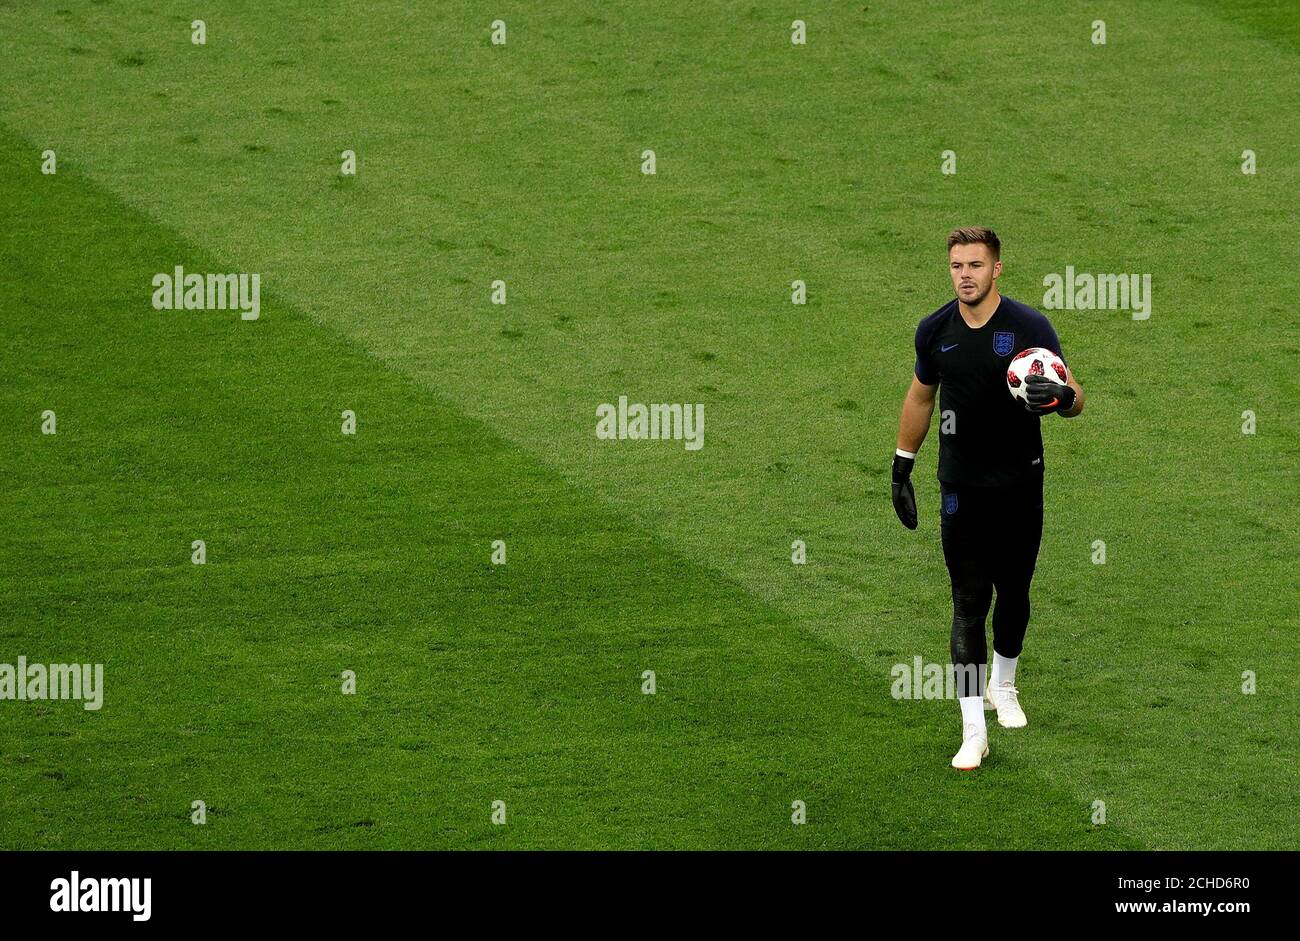 England goalkeeper Jack Butland during warm-up before the FIFA World Cup, Semi Final match at the Luzhniki Stadium, Moscow. Stock Photo